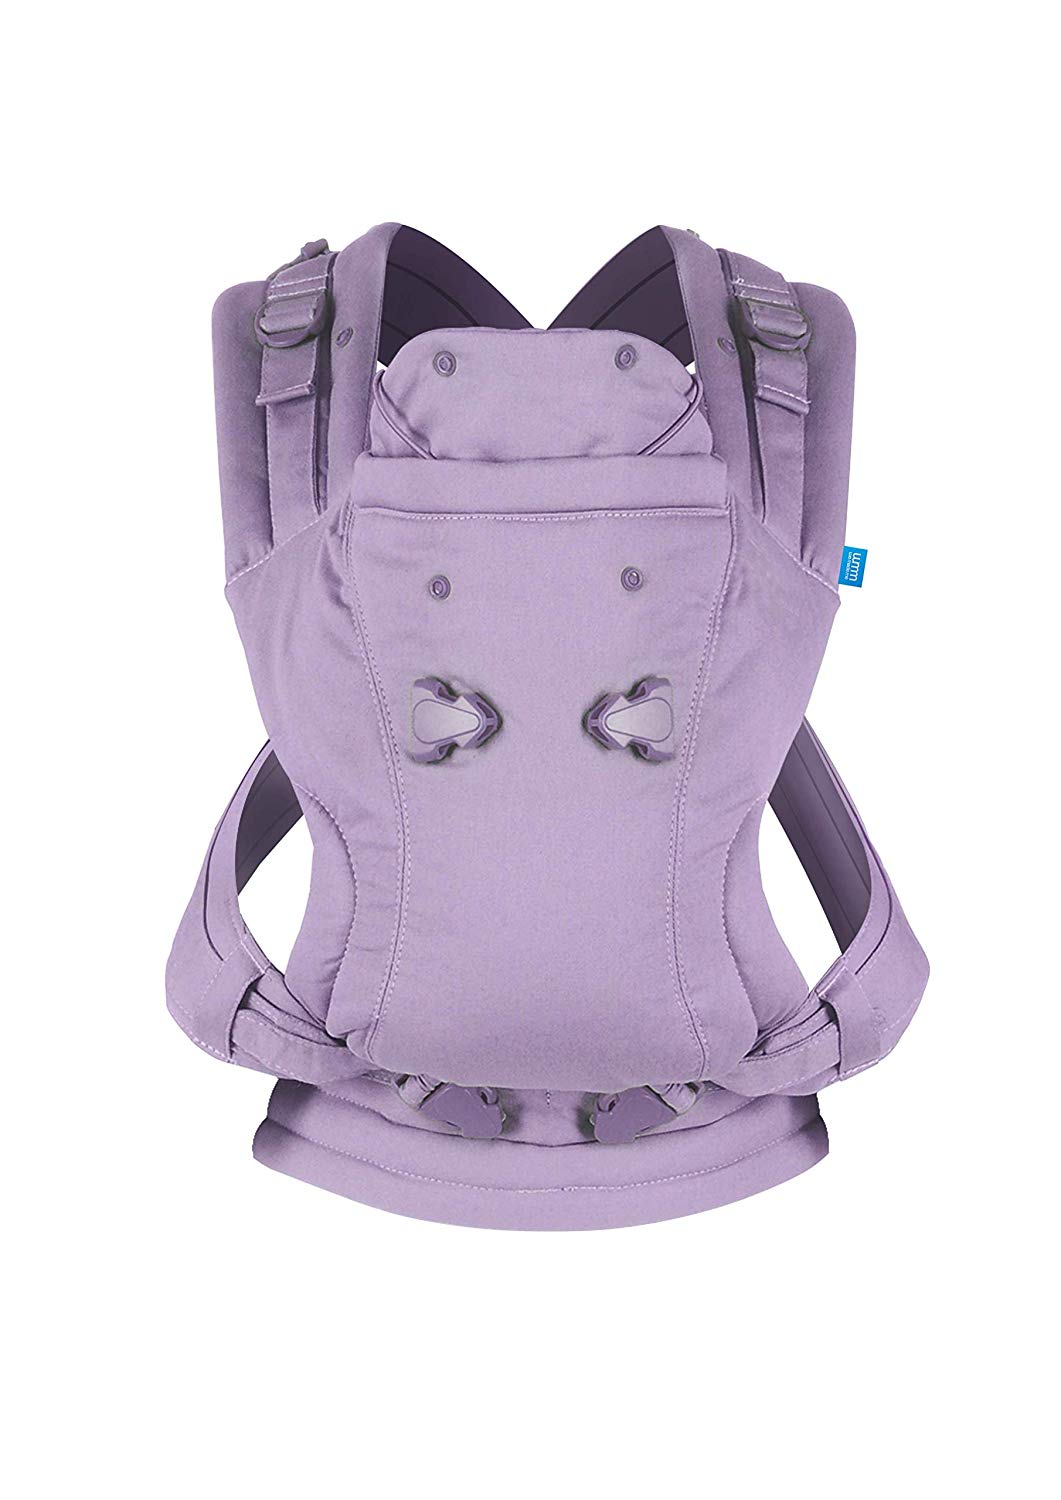 We Made Me Imagine 3-in-1 Carrying Harness, 3.6-15kg (0-36m) Classic